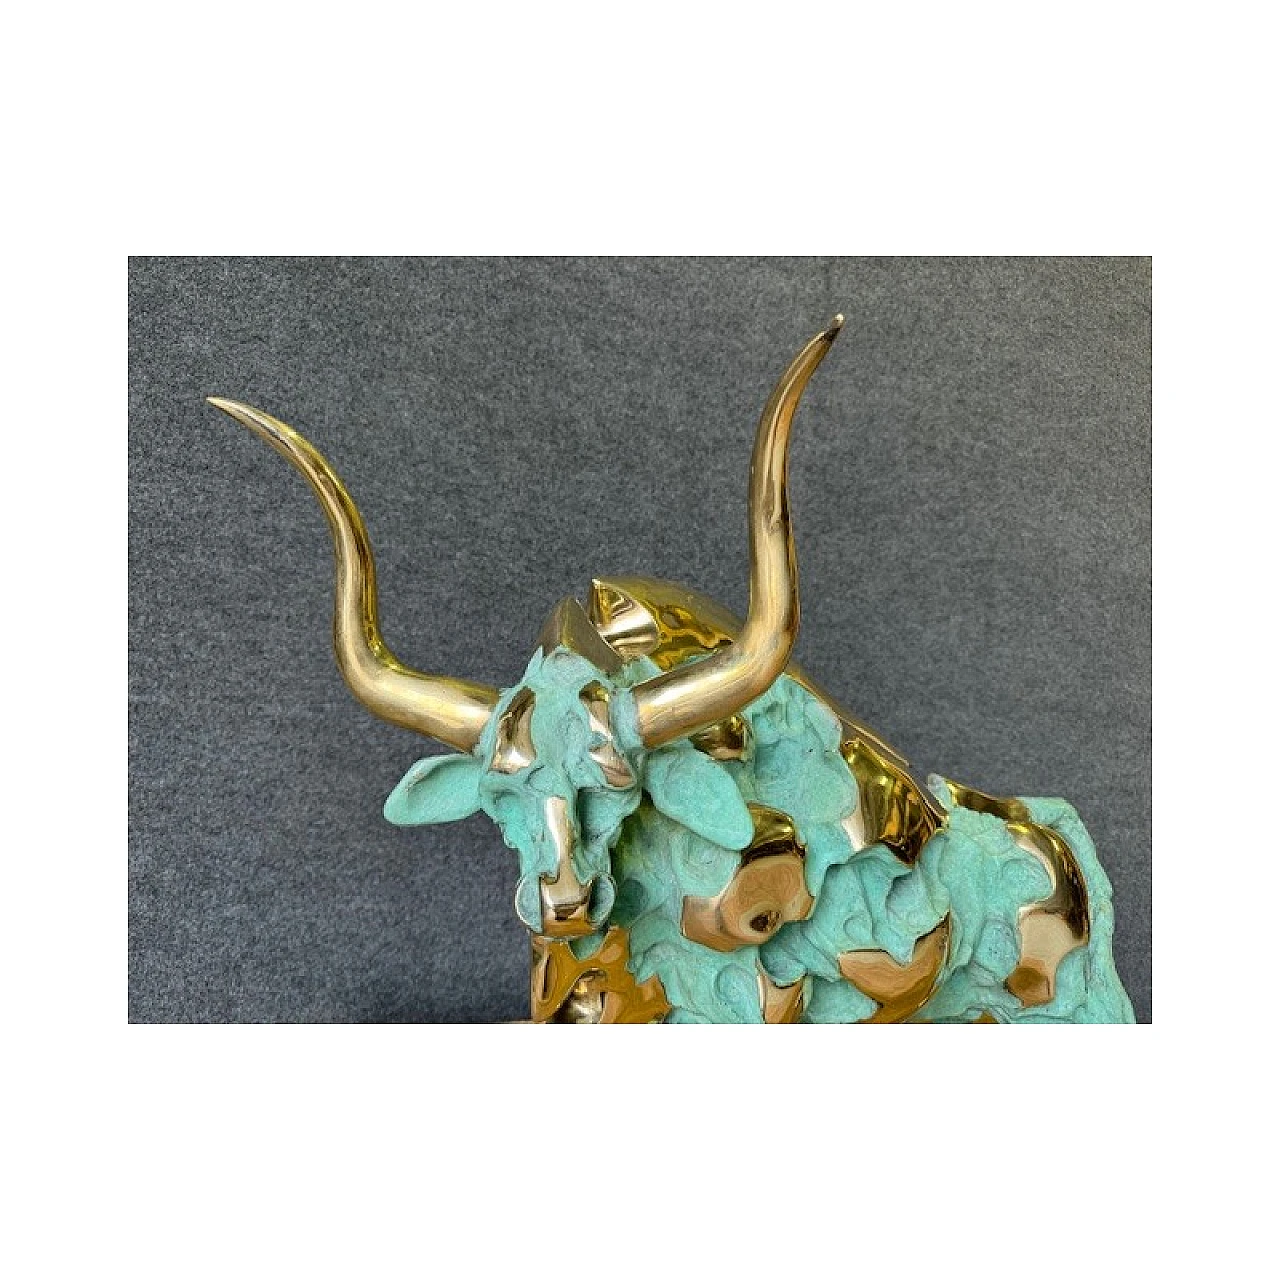 Oxidized and polished bronze bull sculpture 2